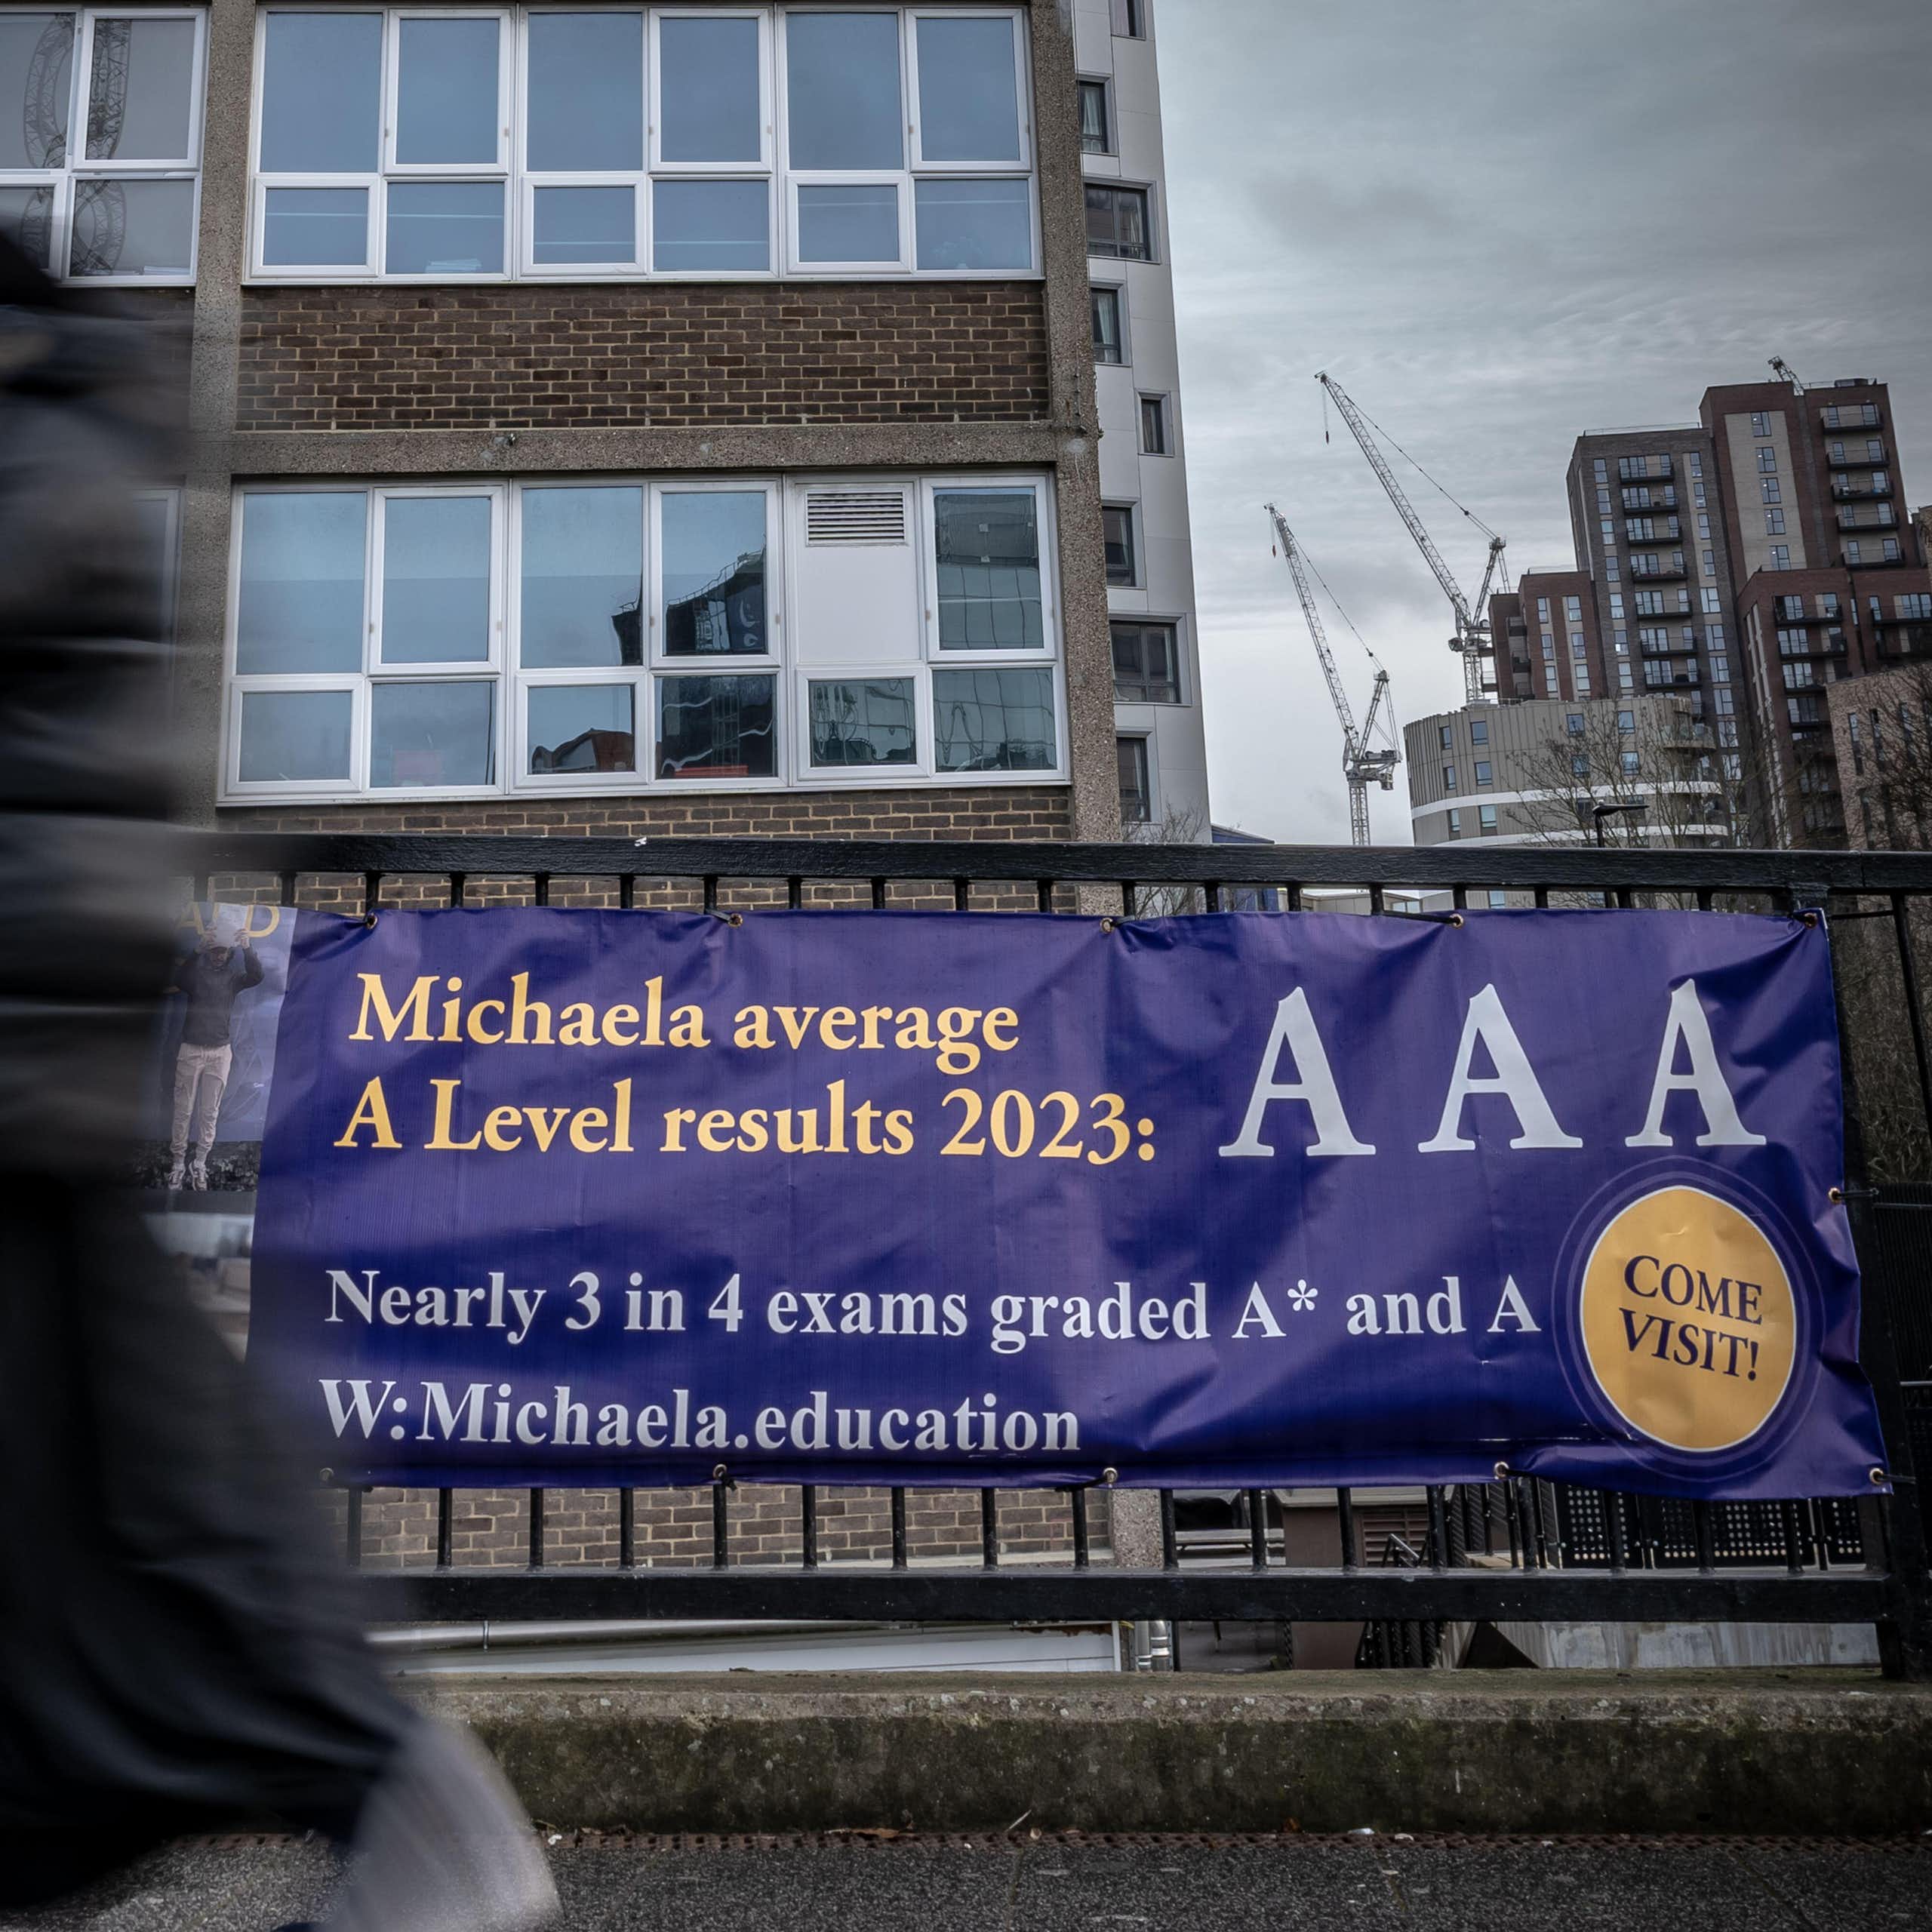 School building with banner outside reading 'Michaela average A Level results 2023: AAA